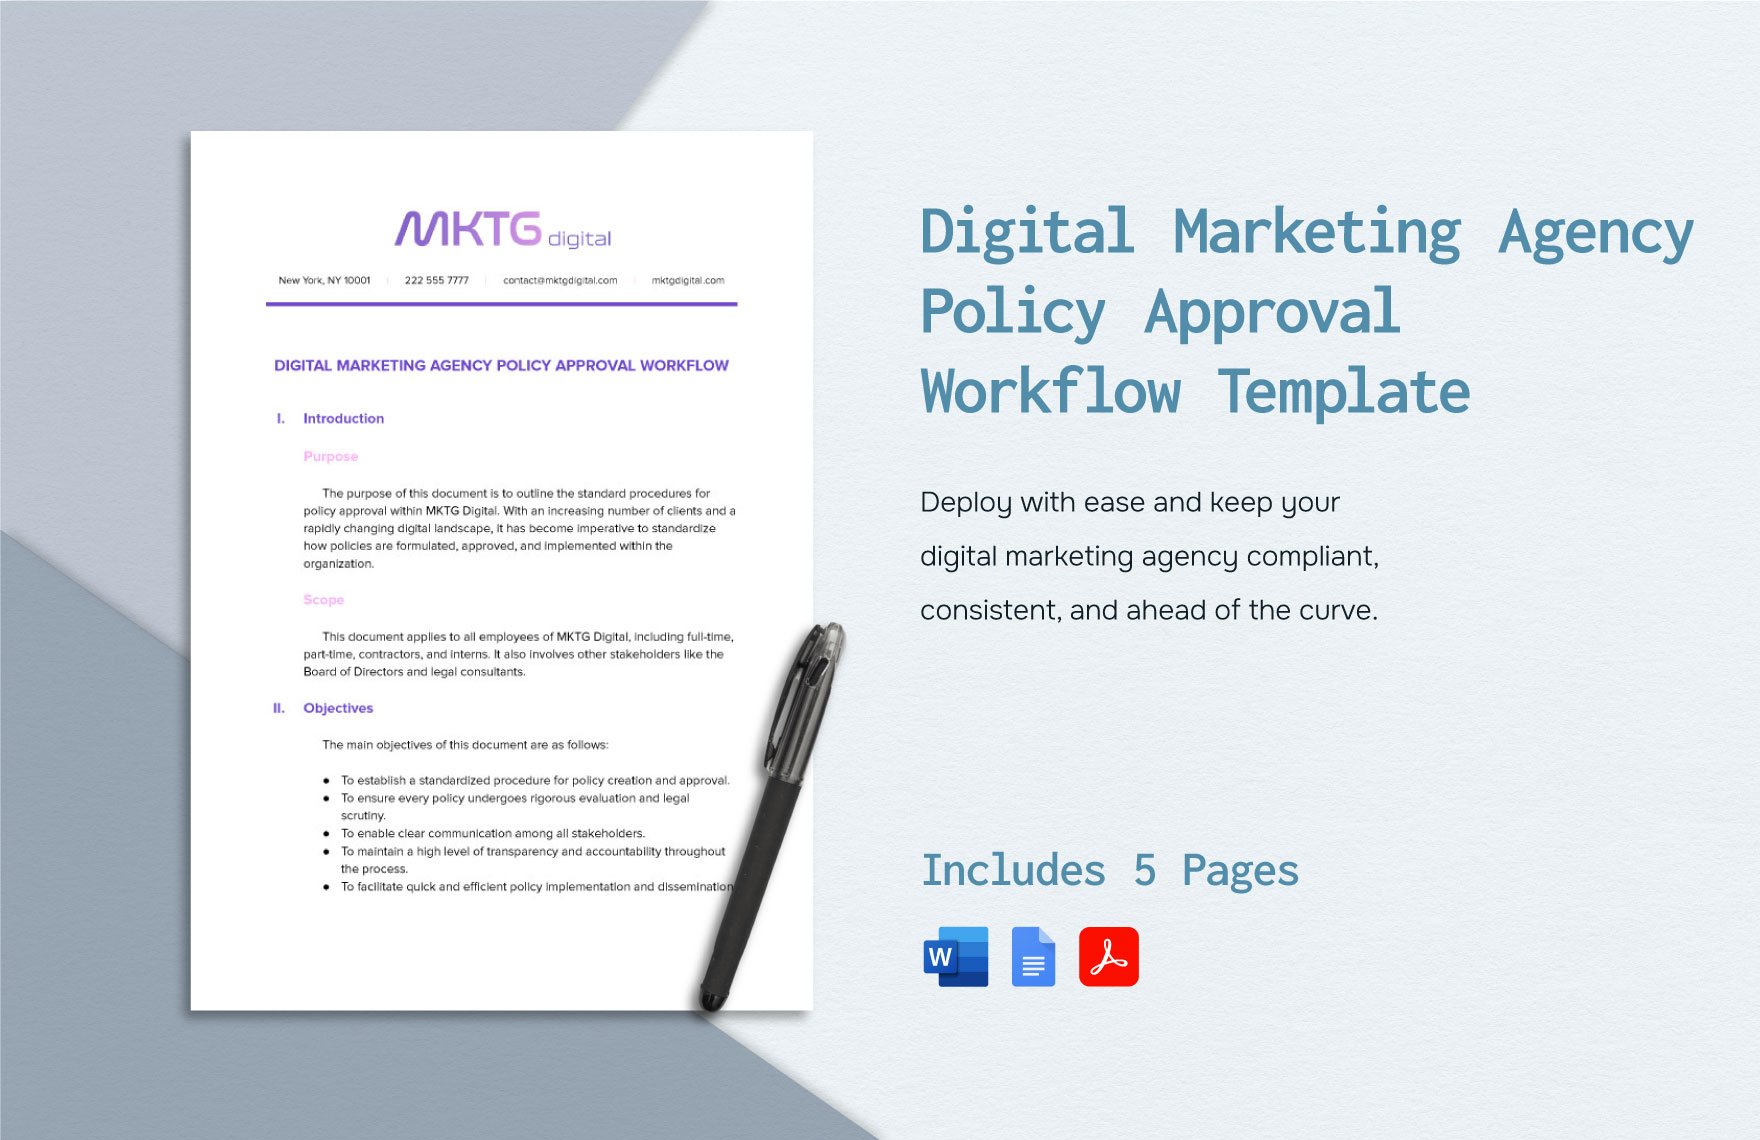 Digital Marketing Agency Policy Approval Workflow Template